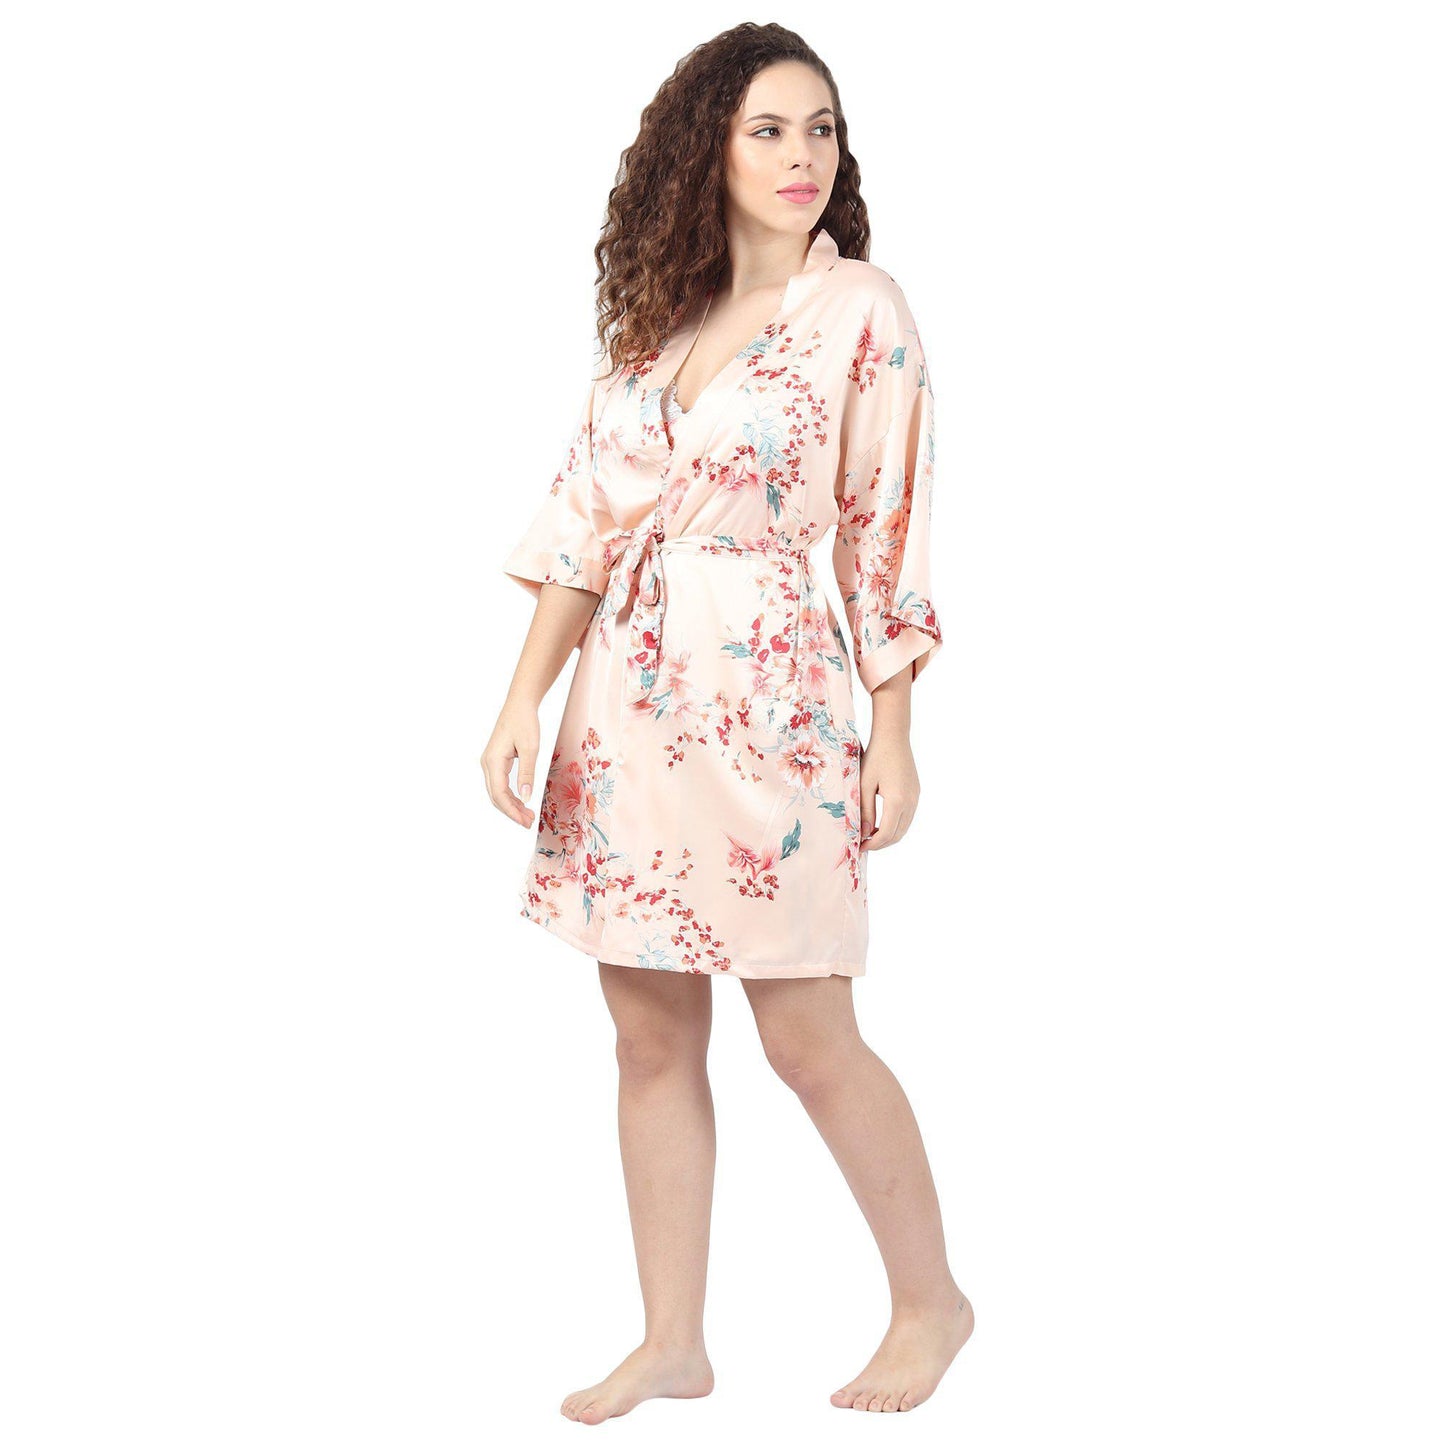 V-Neck With Lace Floral Print Nighty